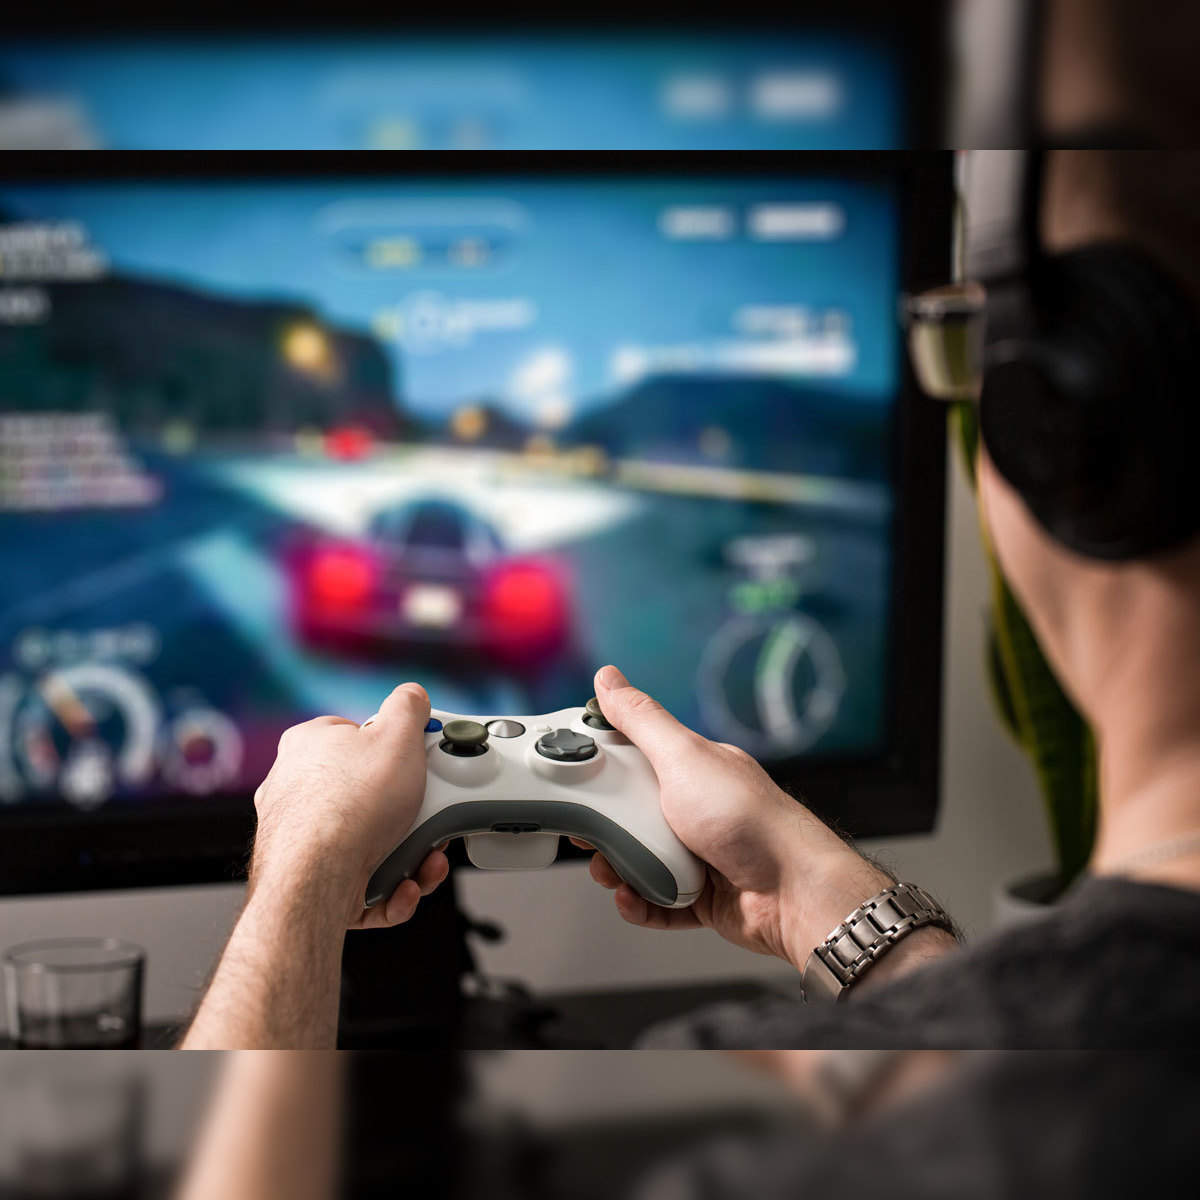 In 10-12 years, 90% of gamers will be moving to the cloud